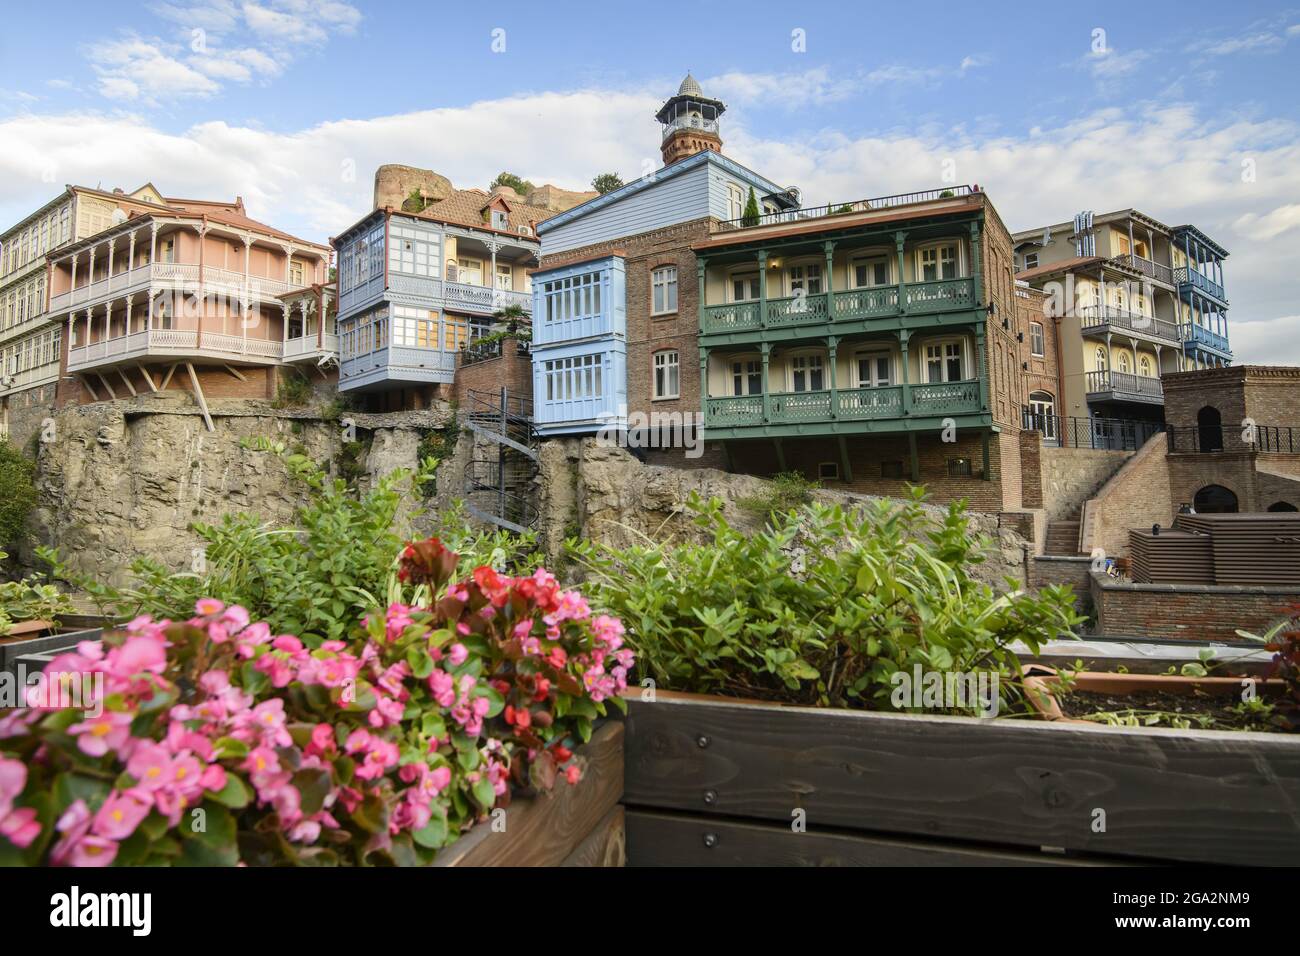 From balconies with flower boxes looking across the Tsavkisi-Tskali River to the old brick buildings with wooden balconies built on the cliffs in L... Stock Photo